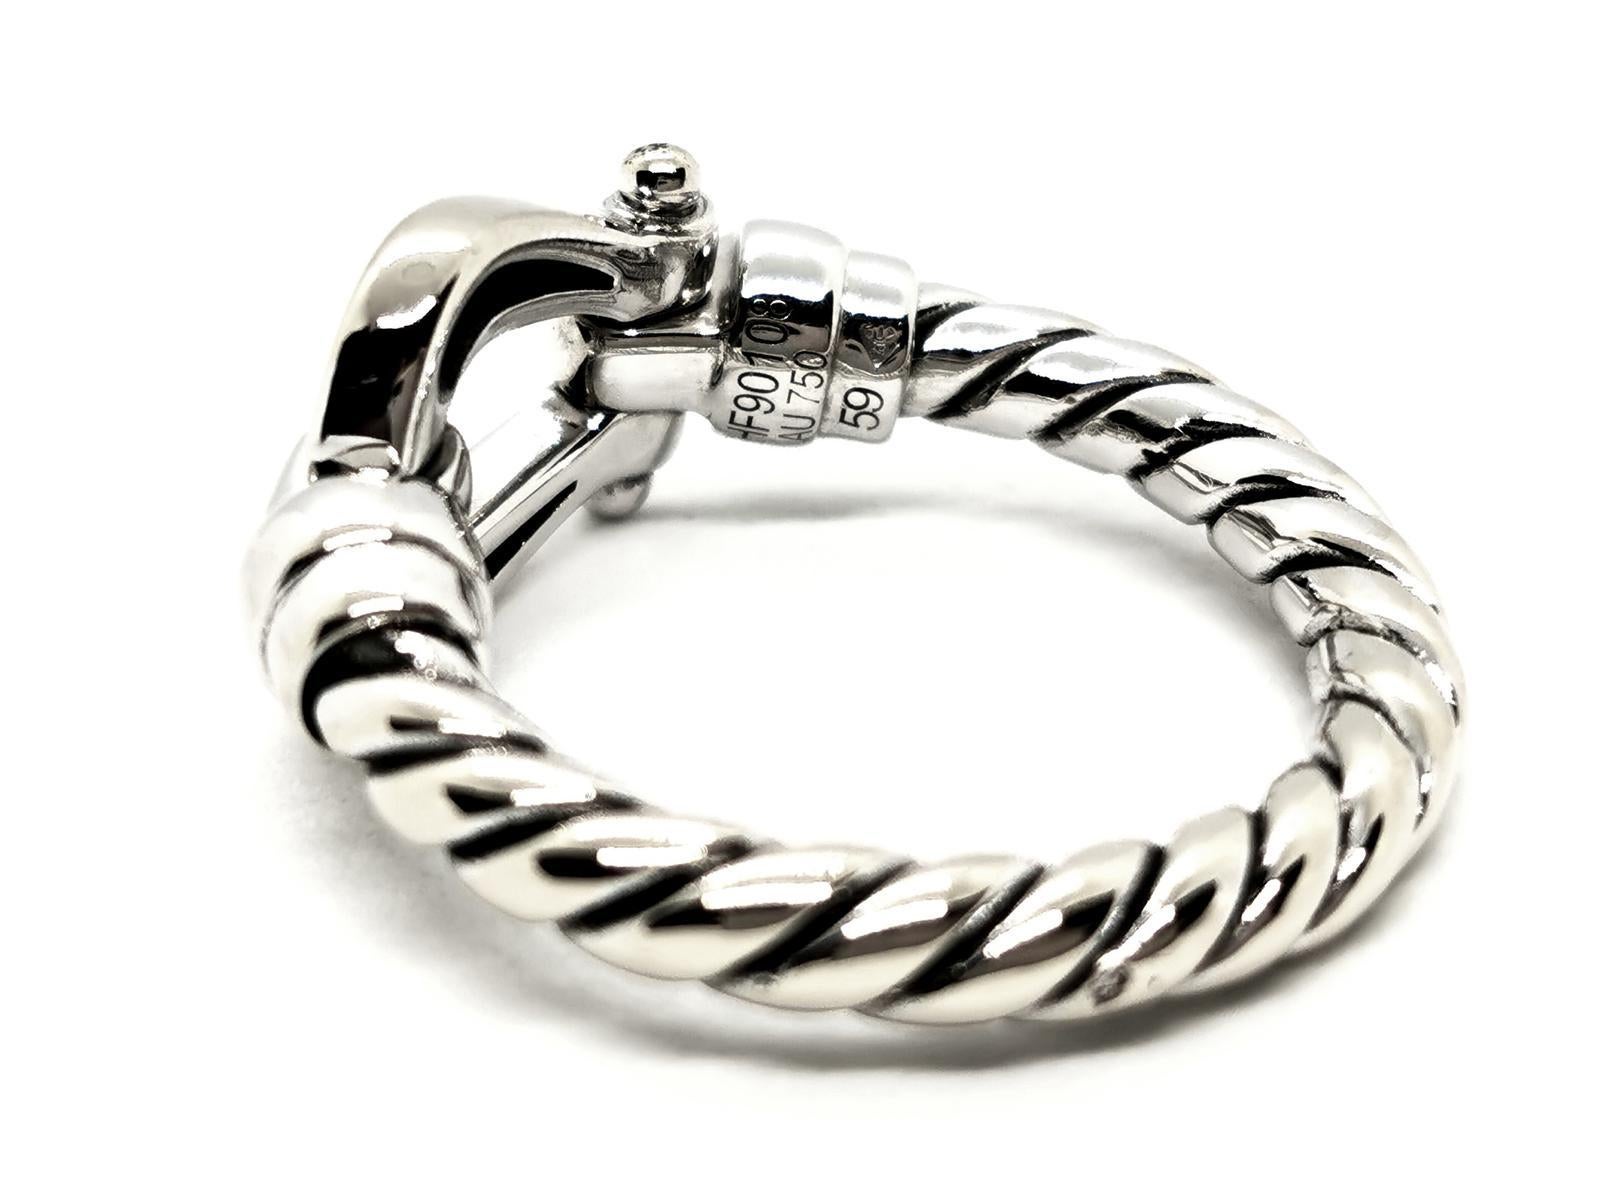 Women's Fred Ring Force 10 White Gold